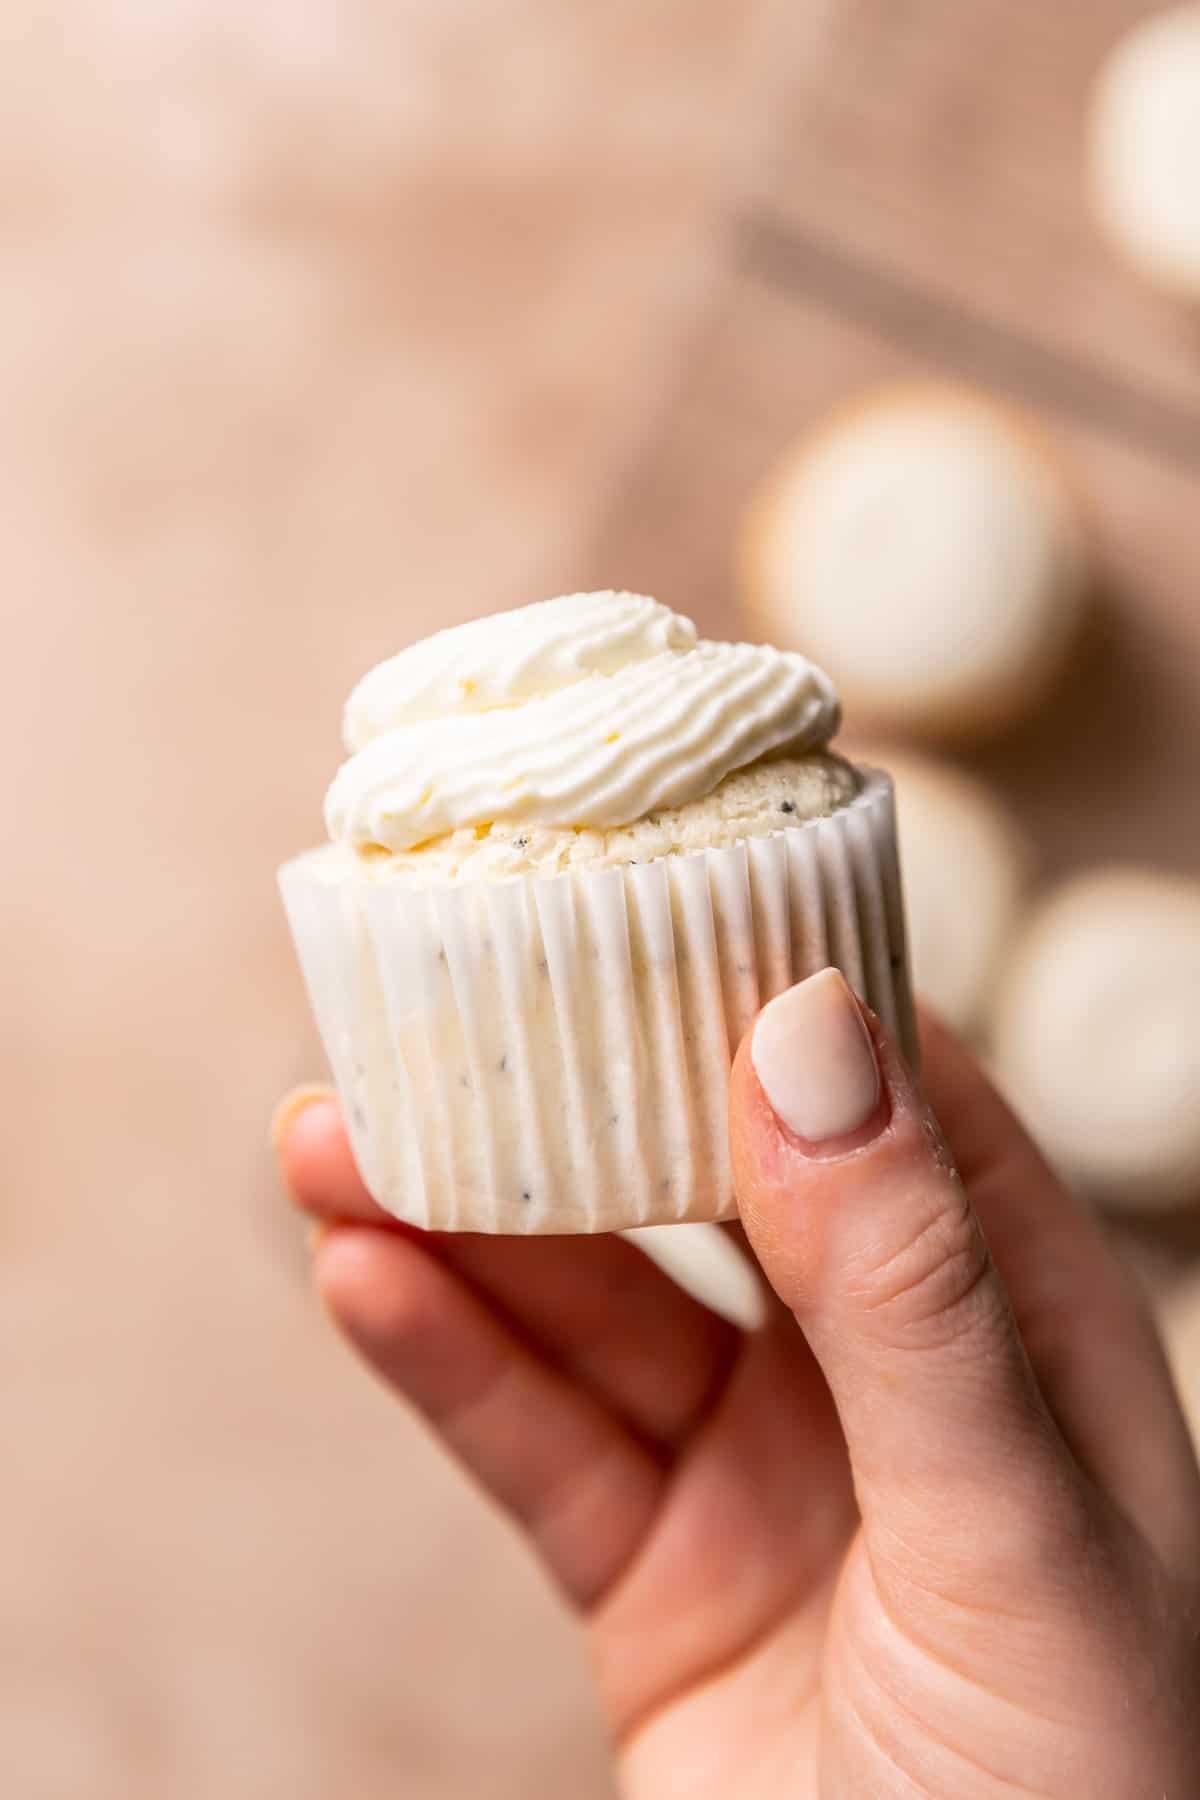 a hand holding a cupcake after it has been frosted